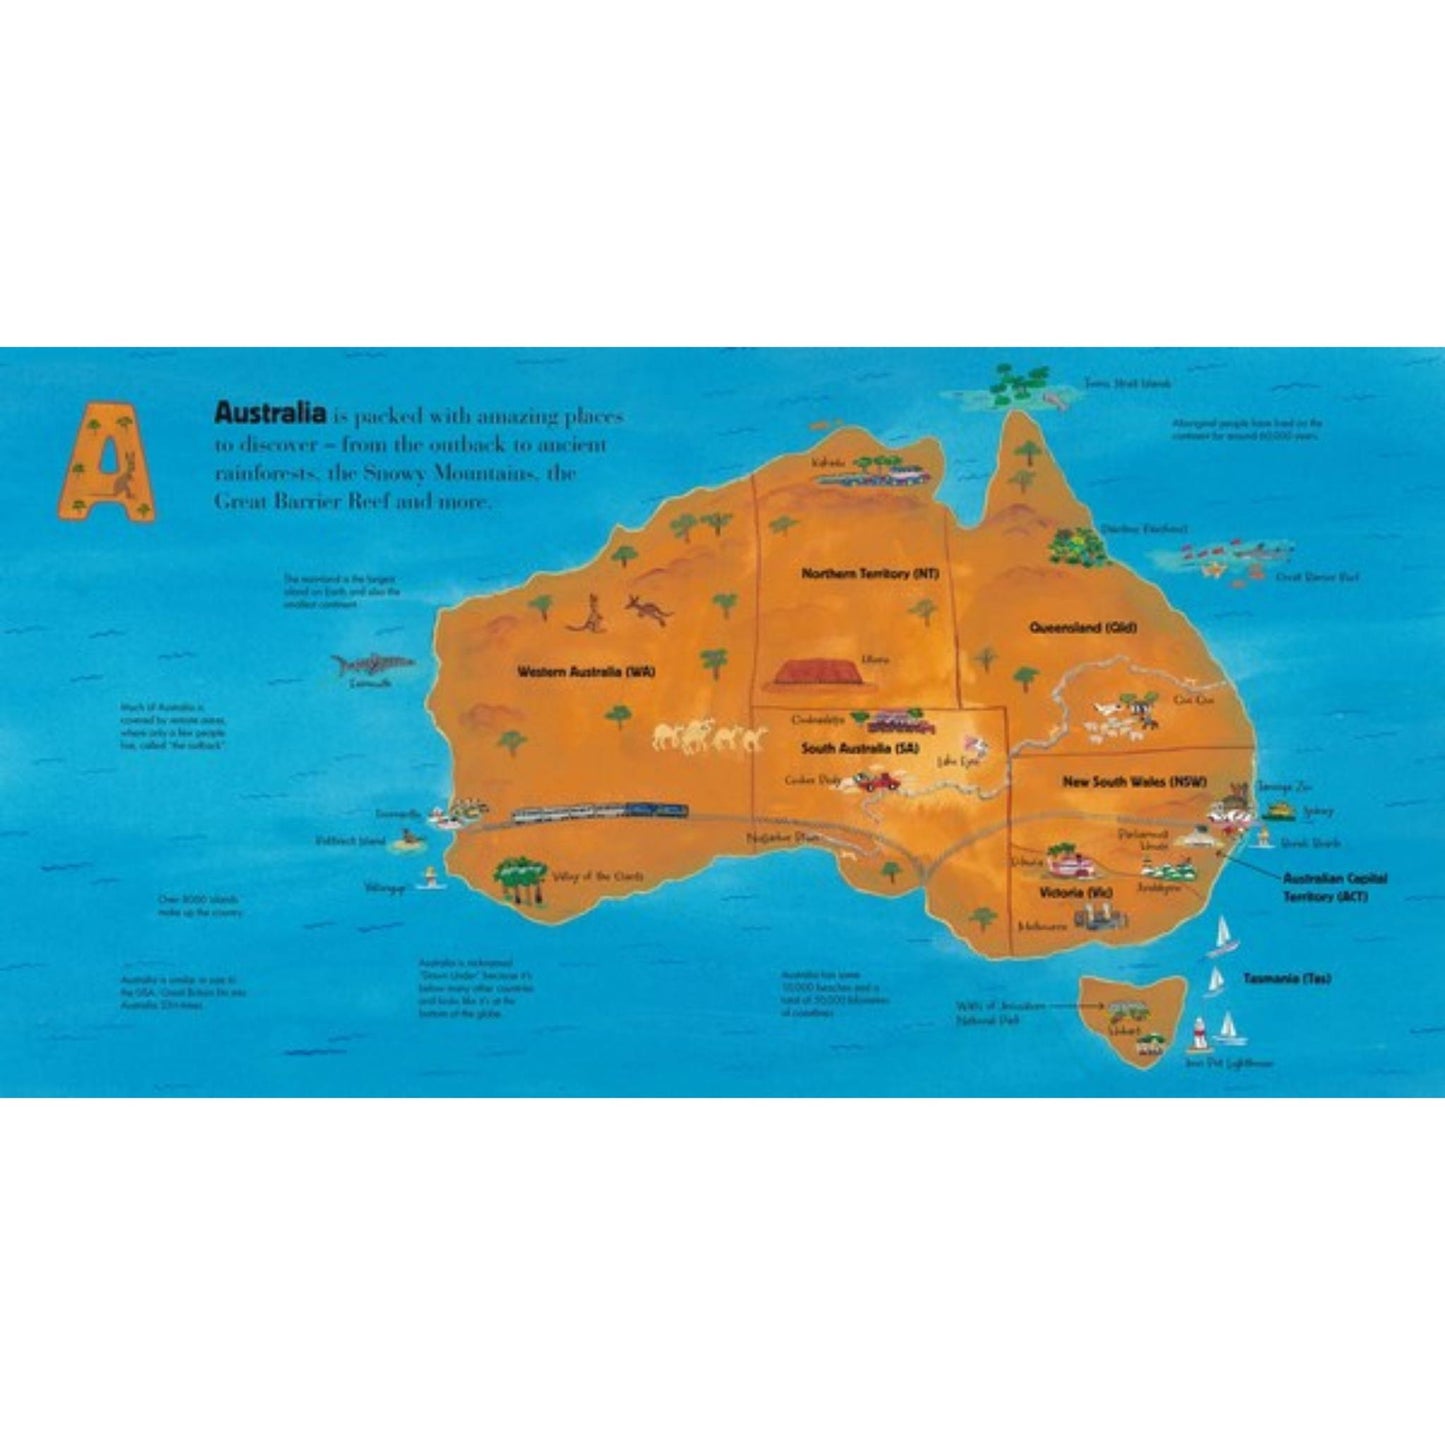 A is For Australia PB